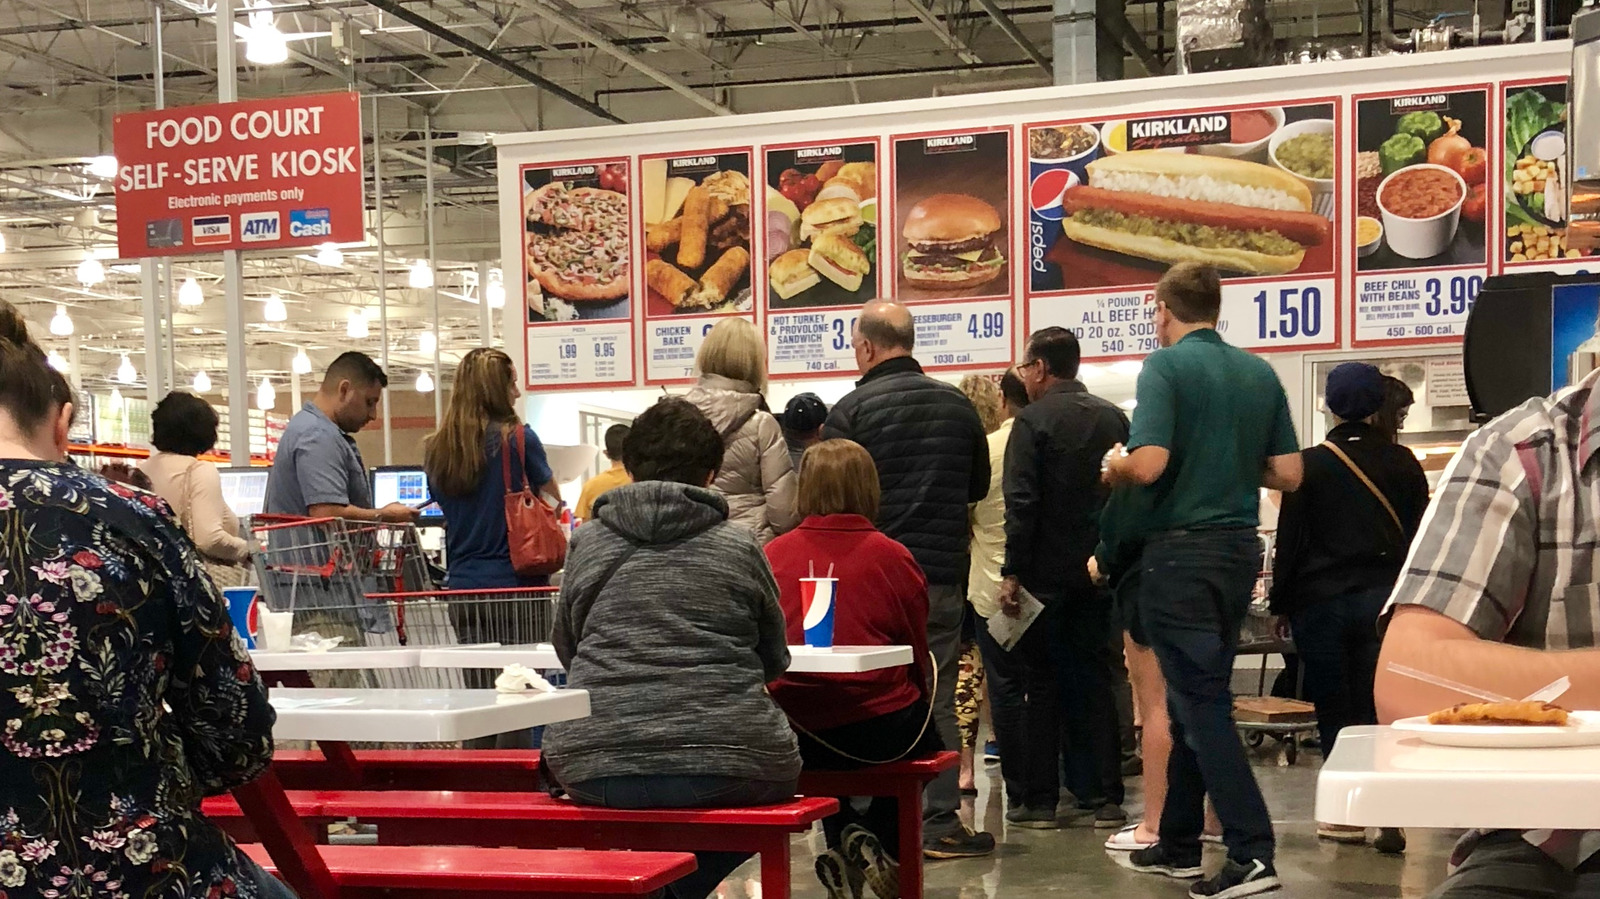 Sam's Club Vs. Costco Who's Winning The Battle For Best Food Court?